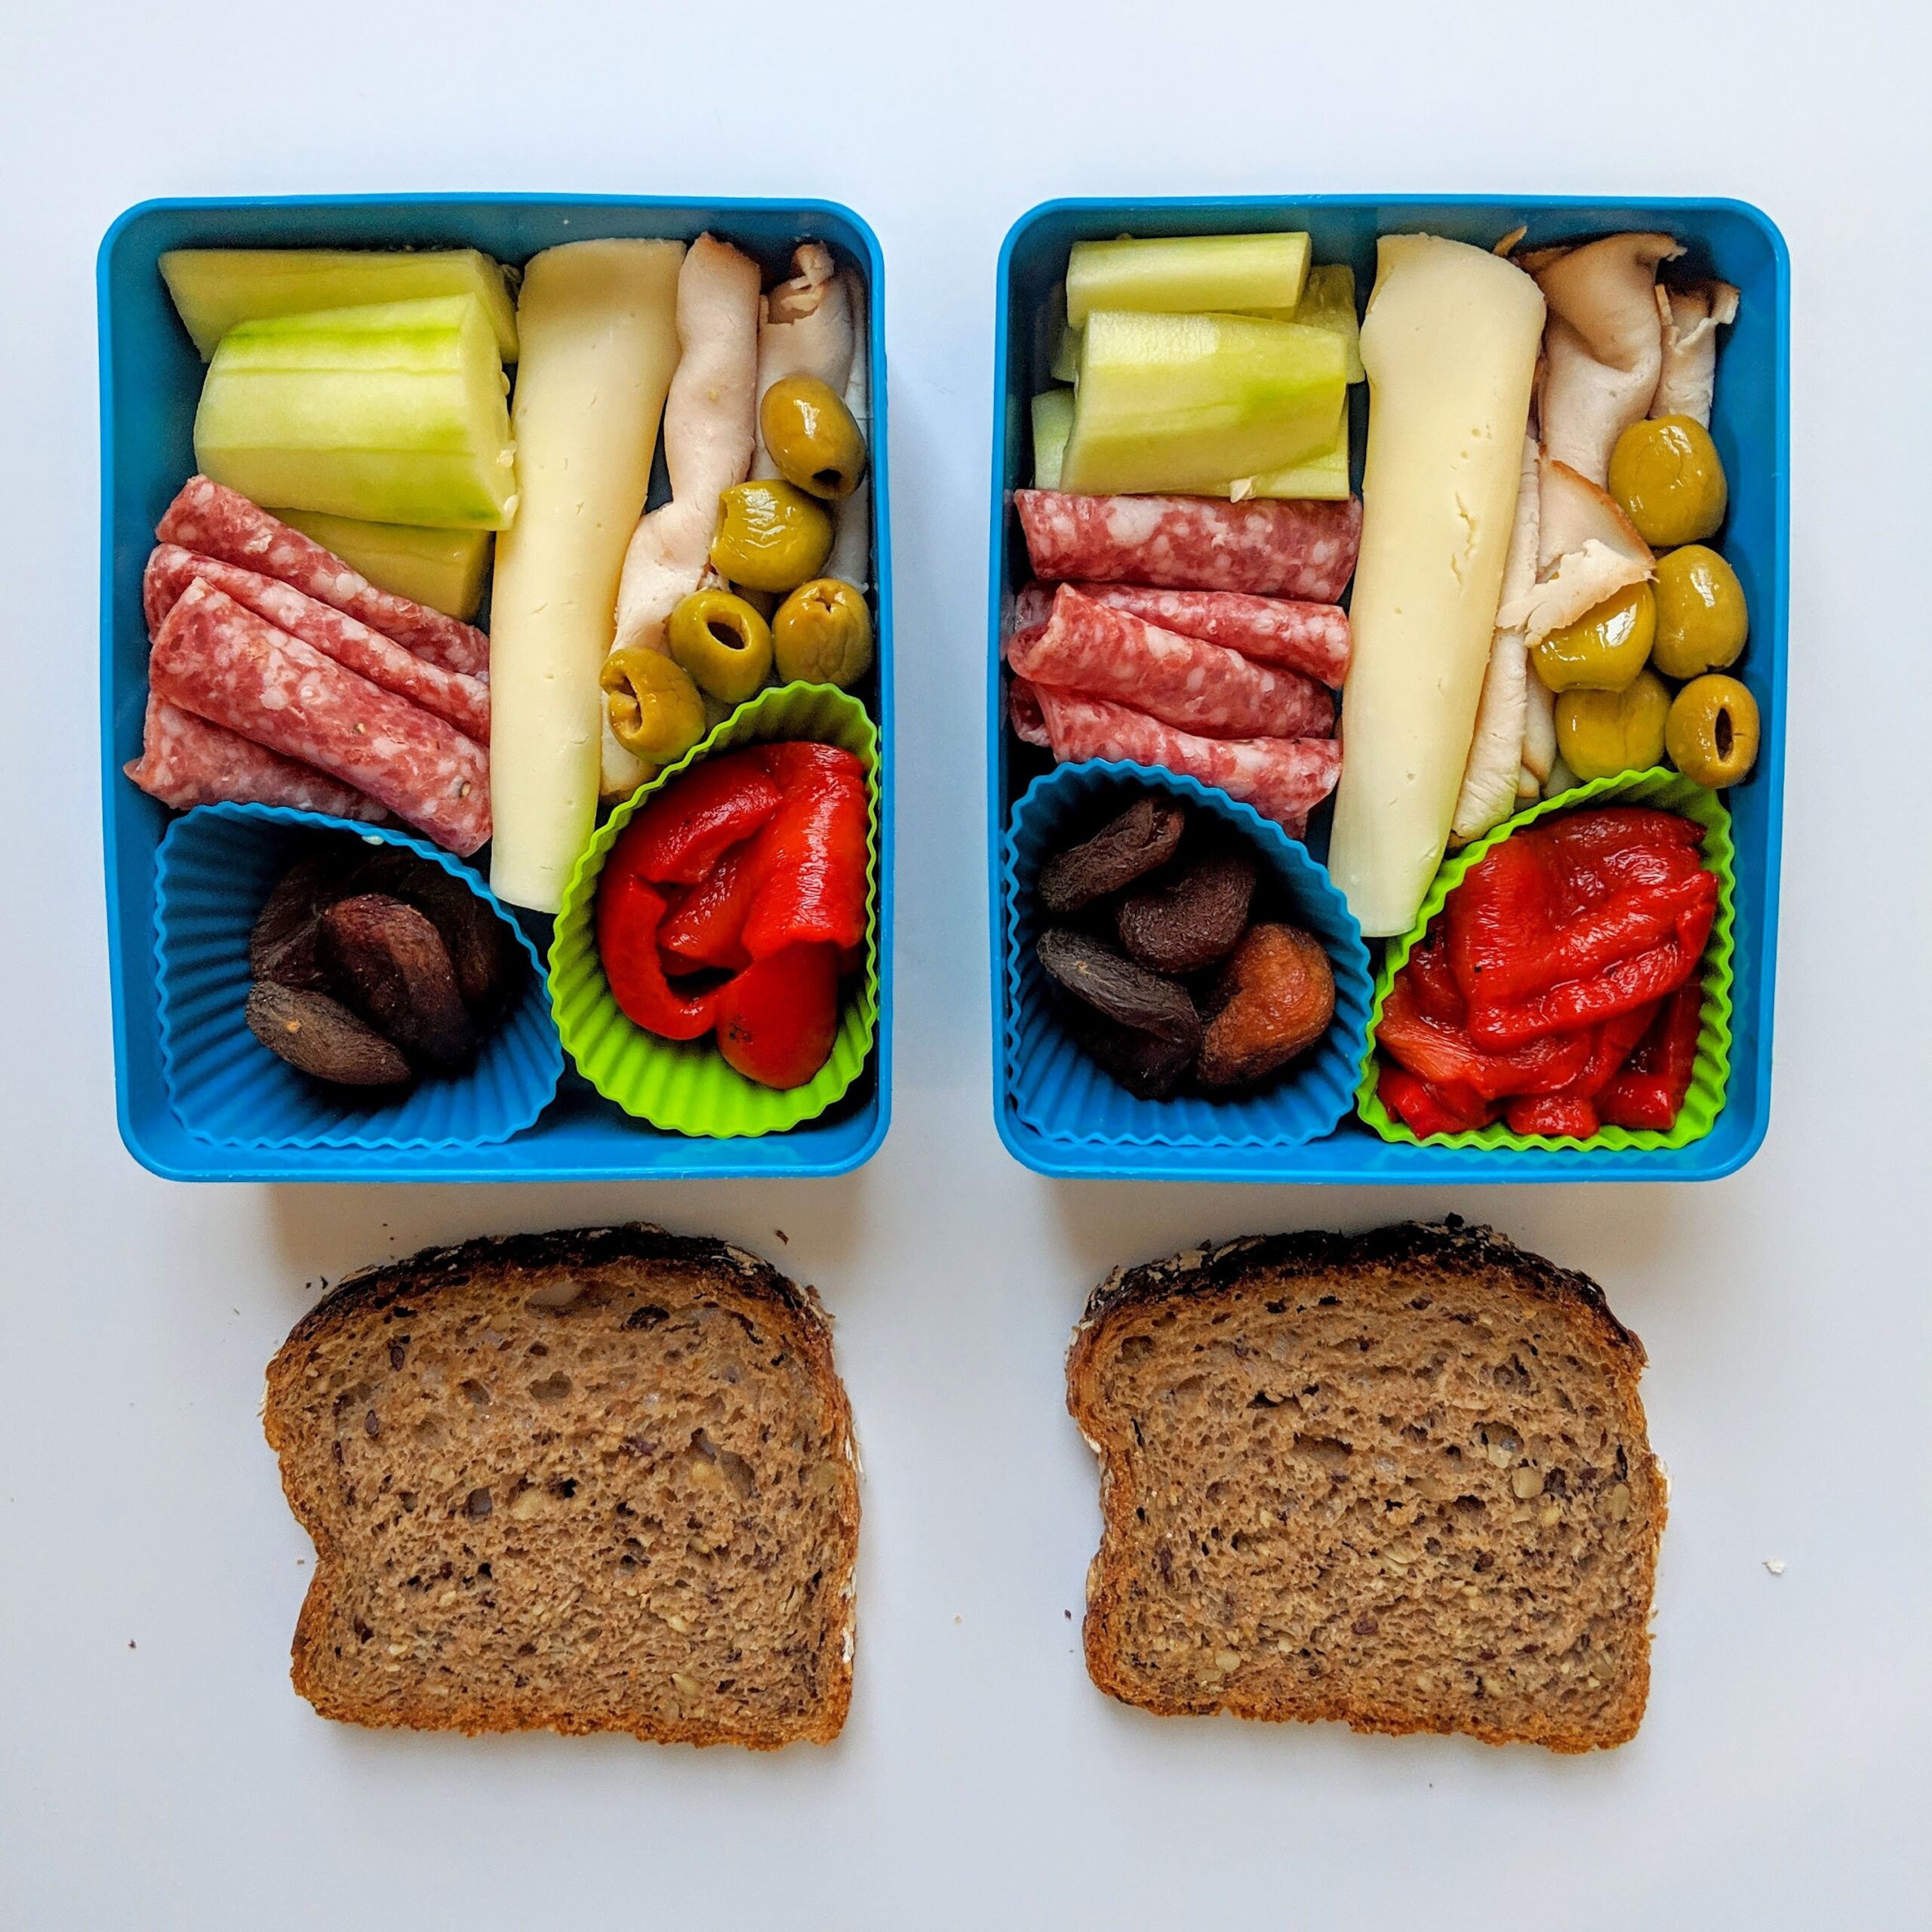 30 Back-to-School Lunch Box Ideas - The Inspiration Board